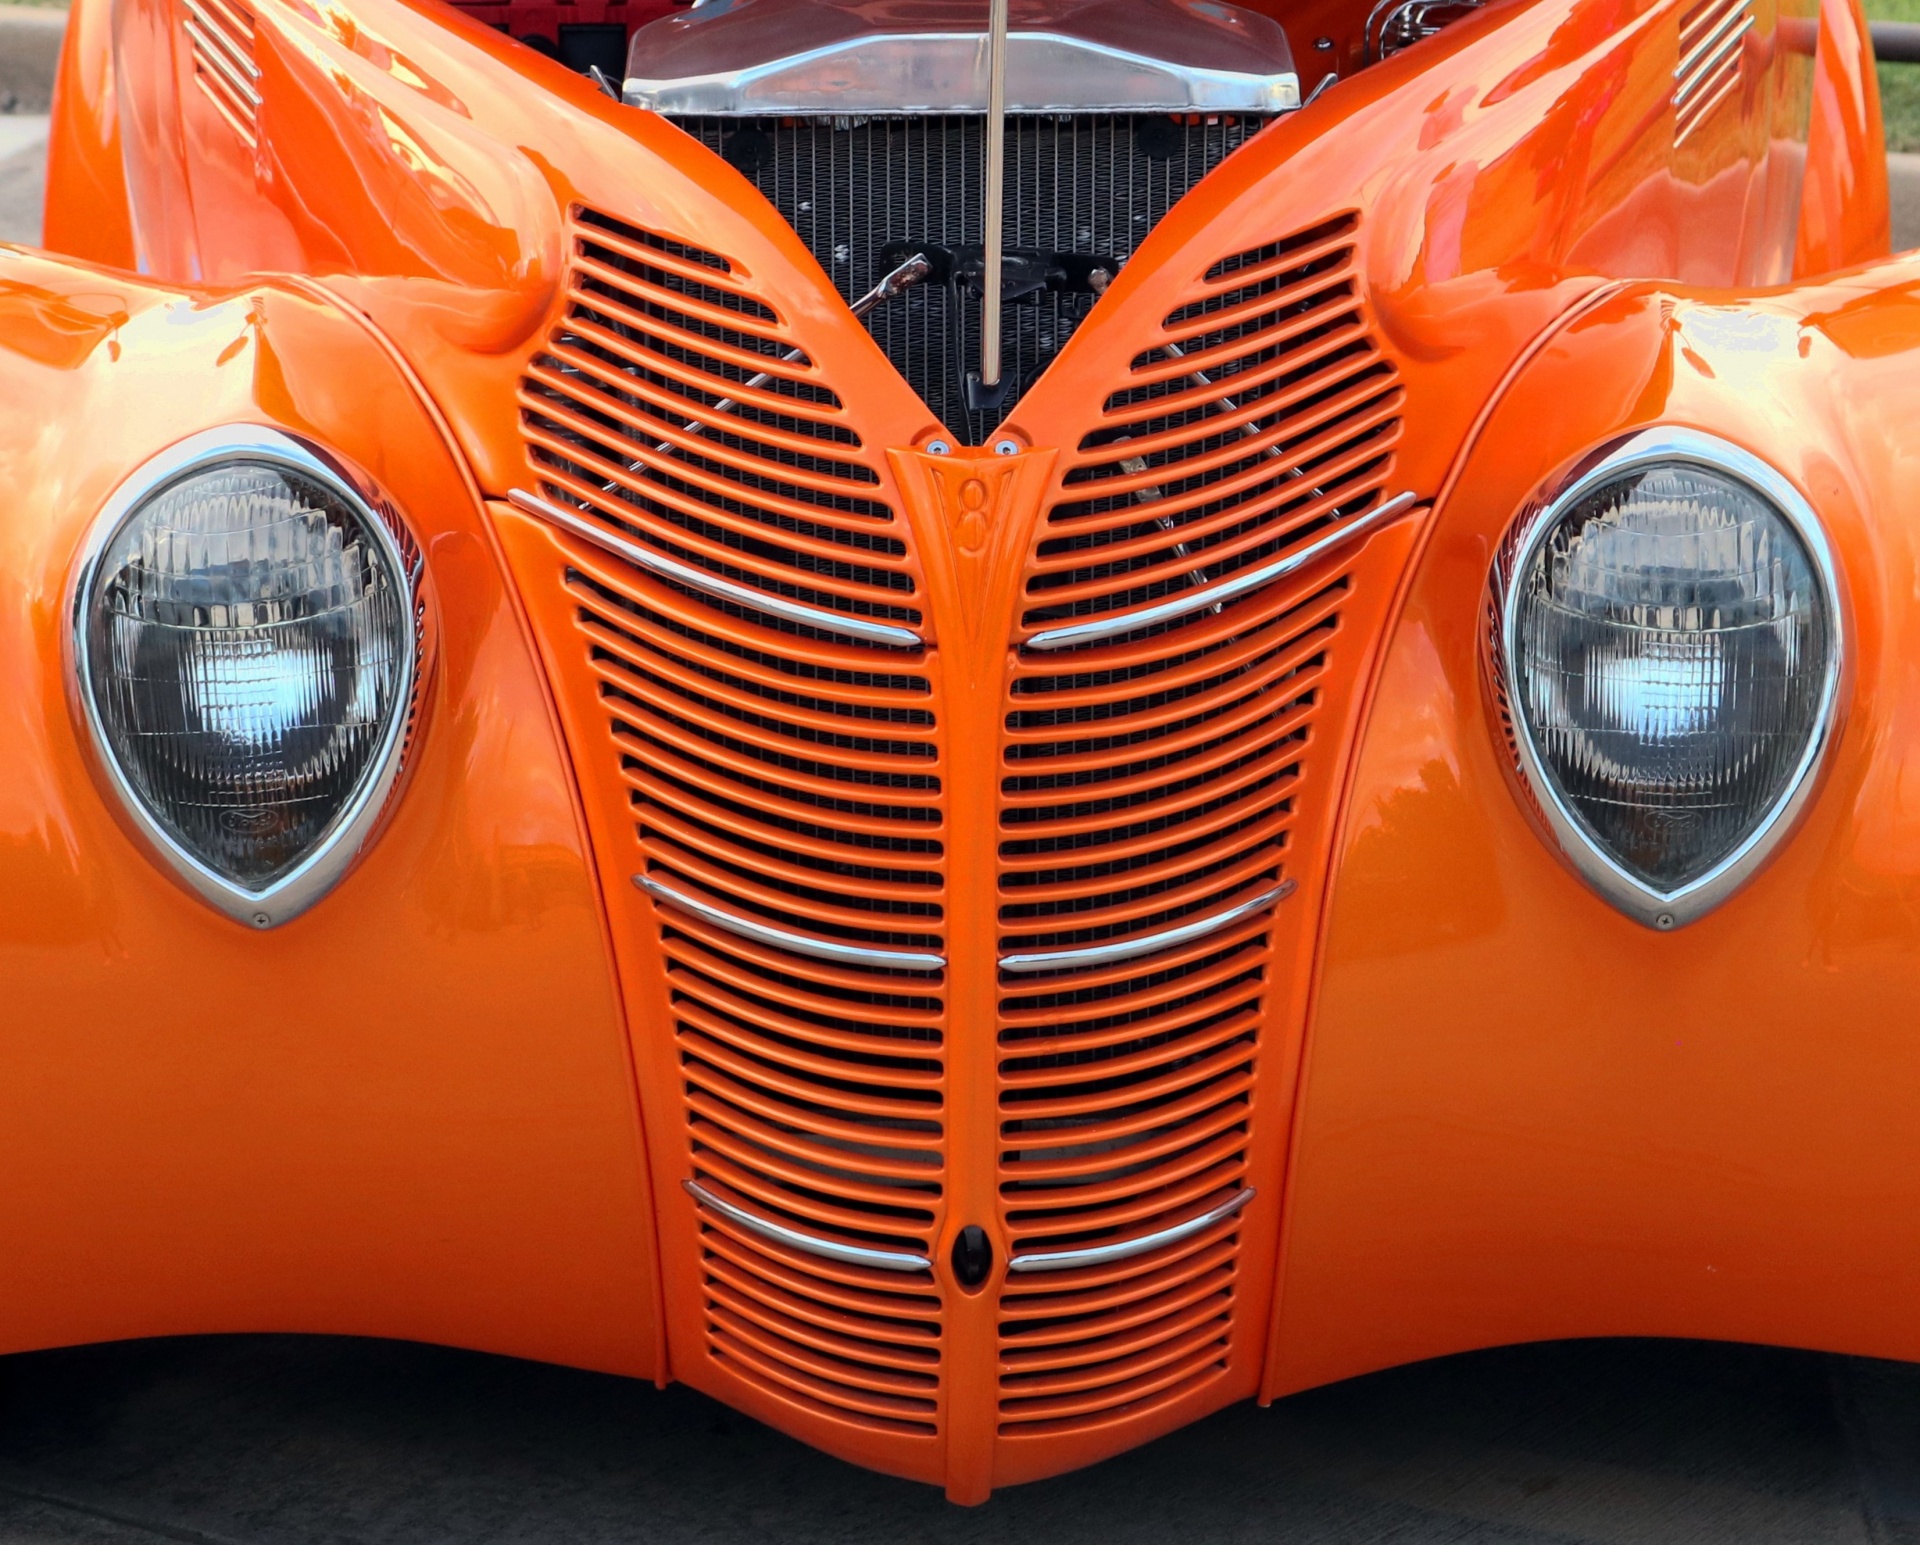 Close-up of the grill and headlights of a customized orange 1938 Ford coupe classic car.